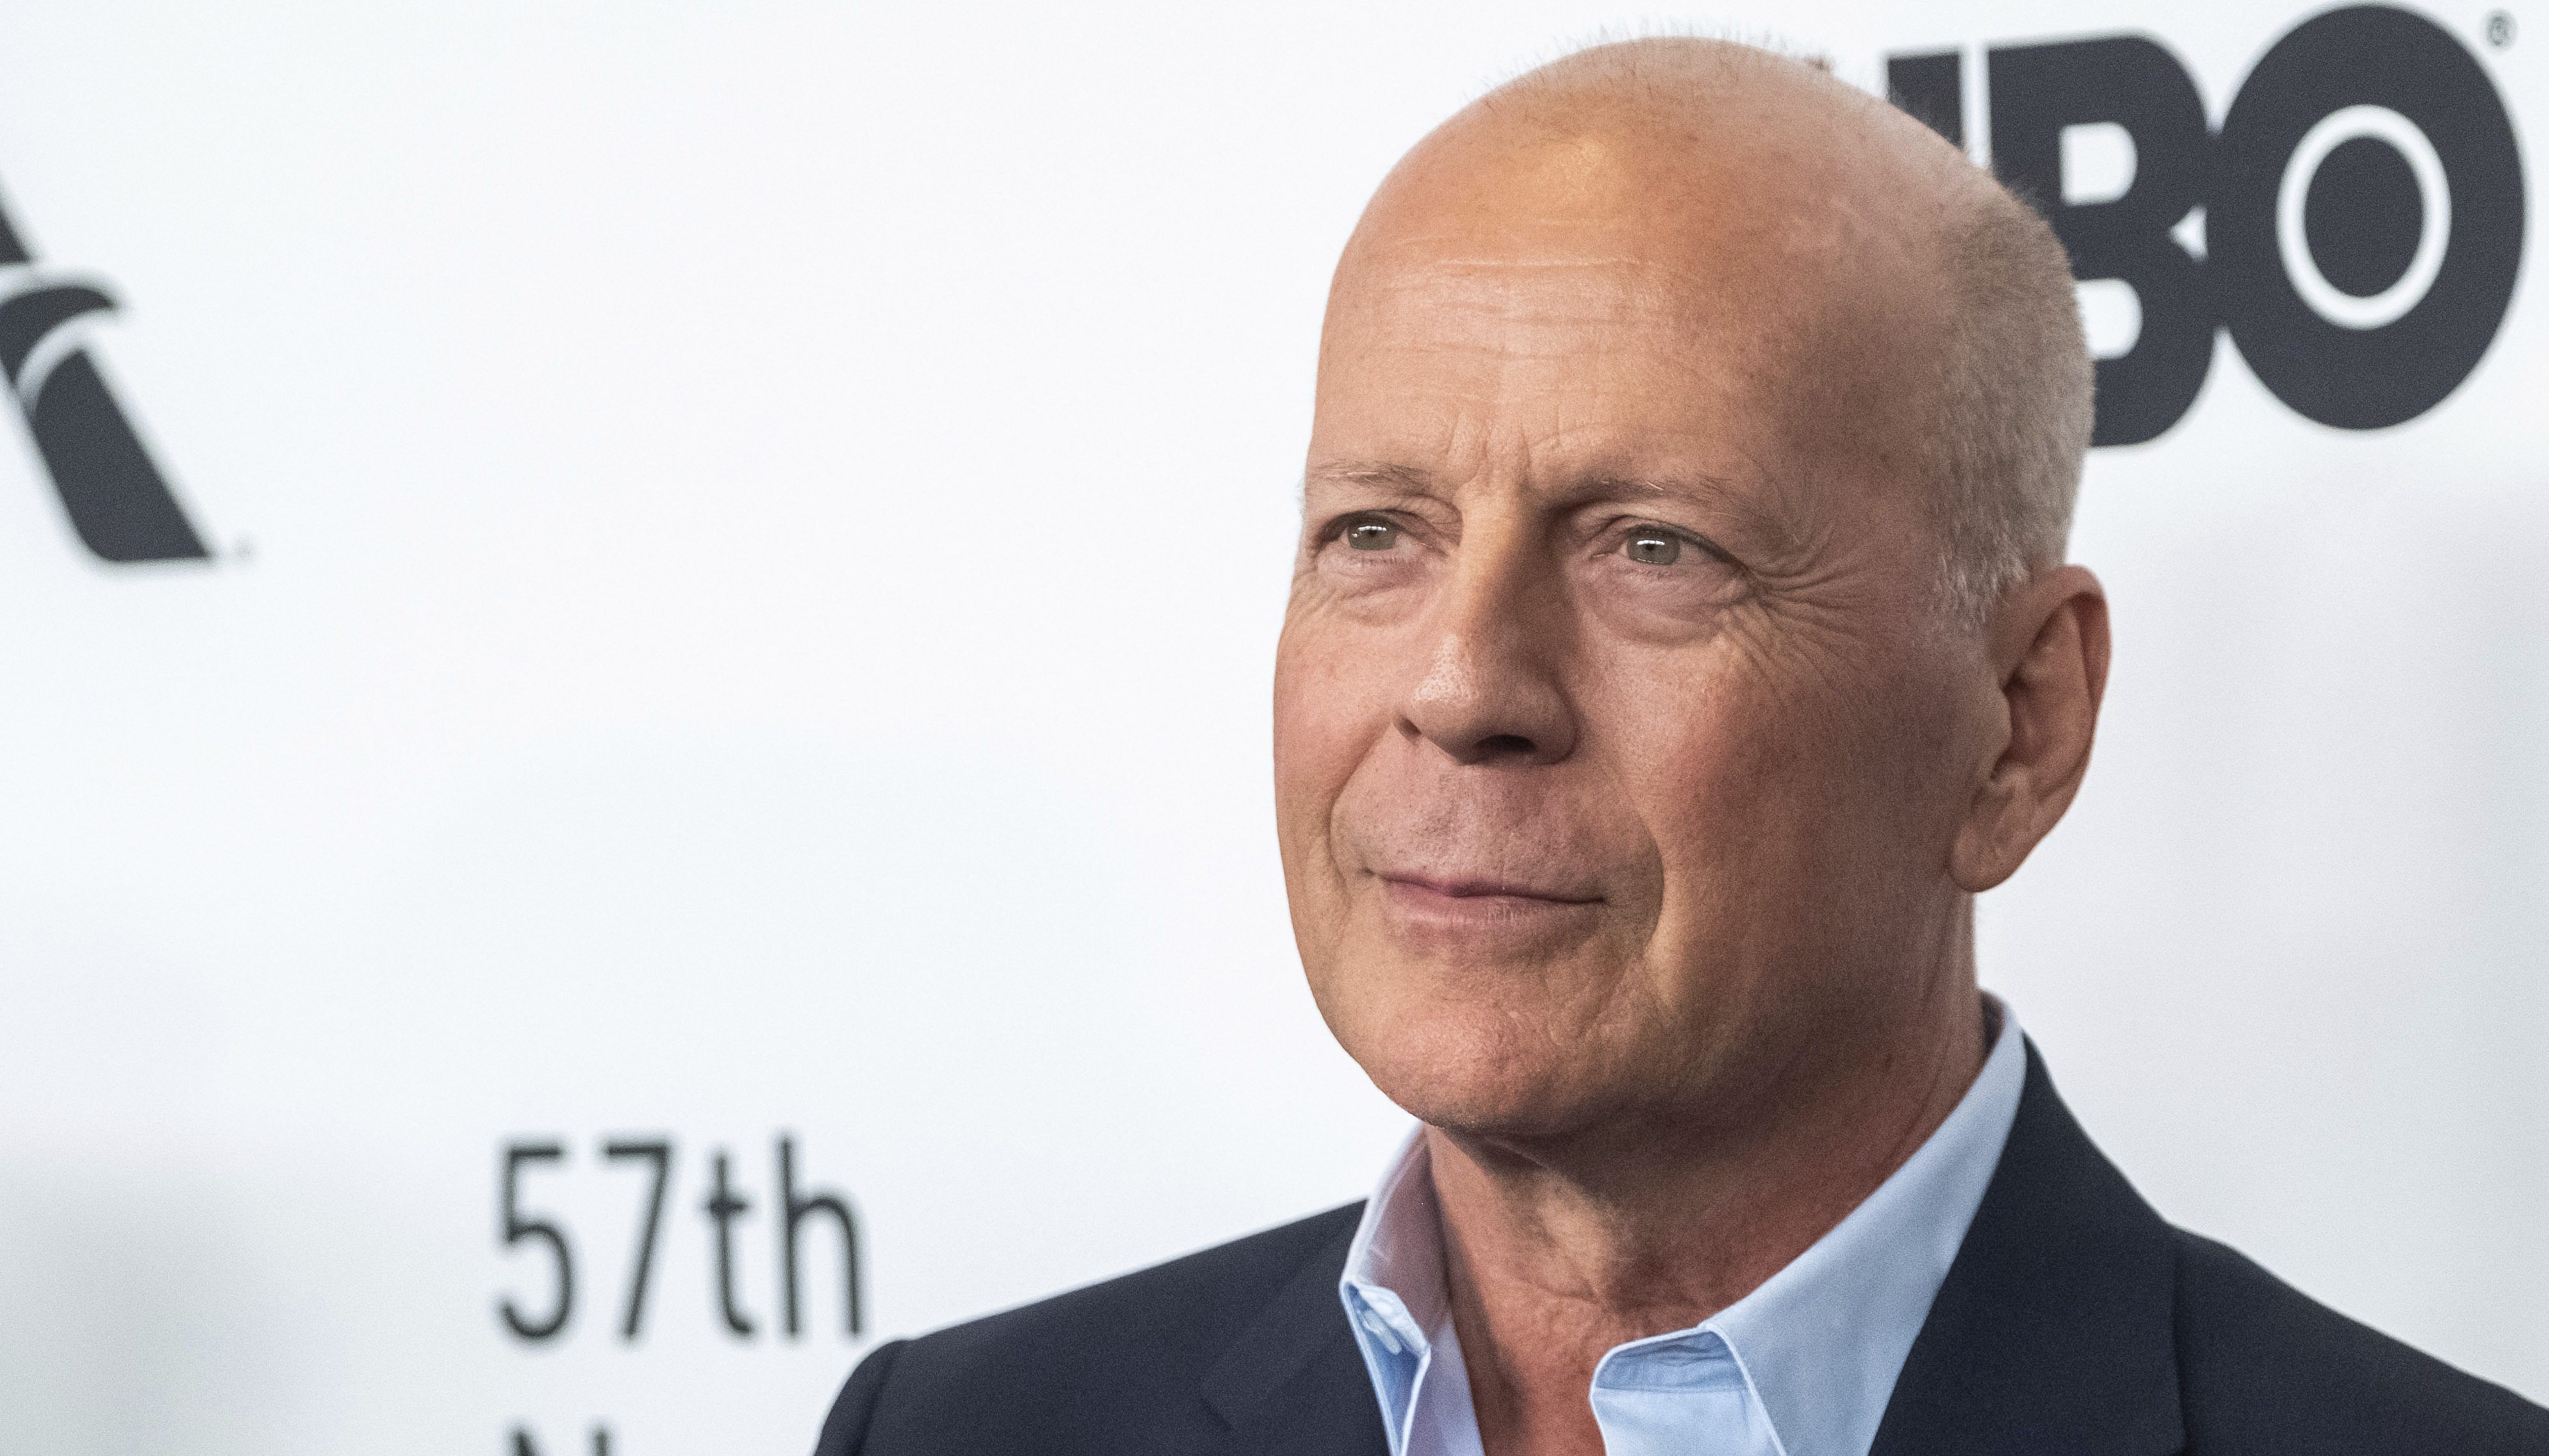 Bruce Willis Out Of Death 2021 Wallpapers